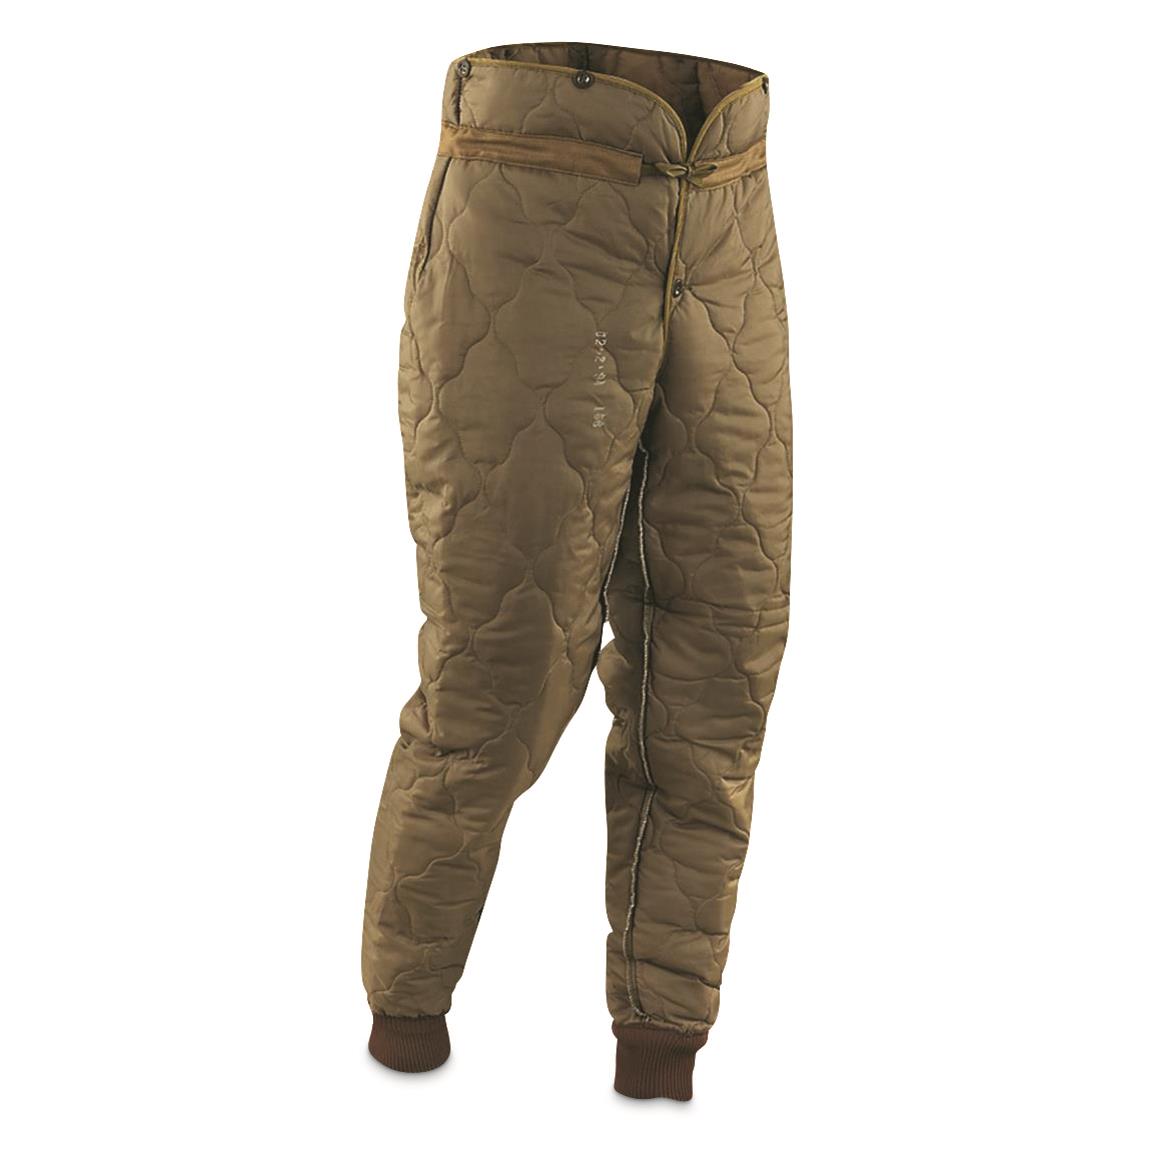 Czech Military Surplus Thermal Pant Liners, 2 Pack, New